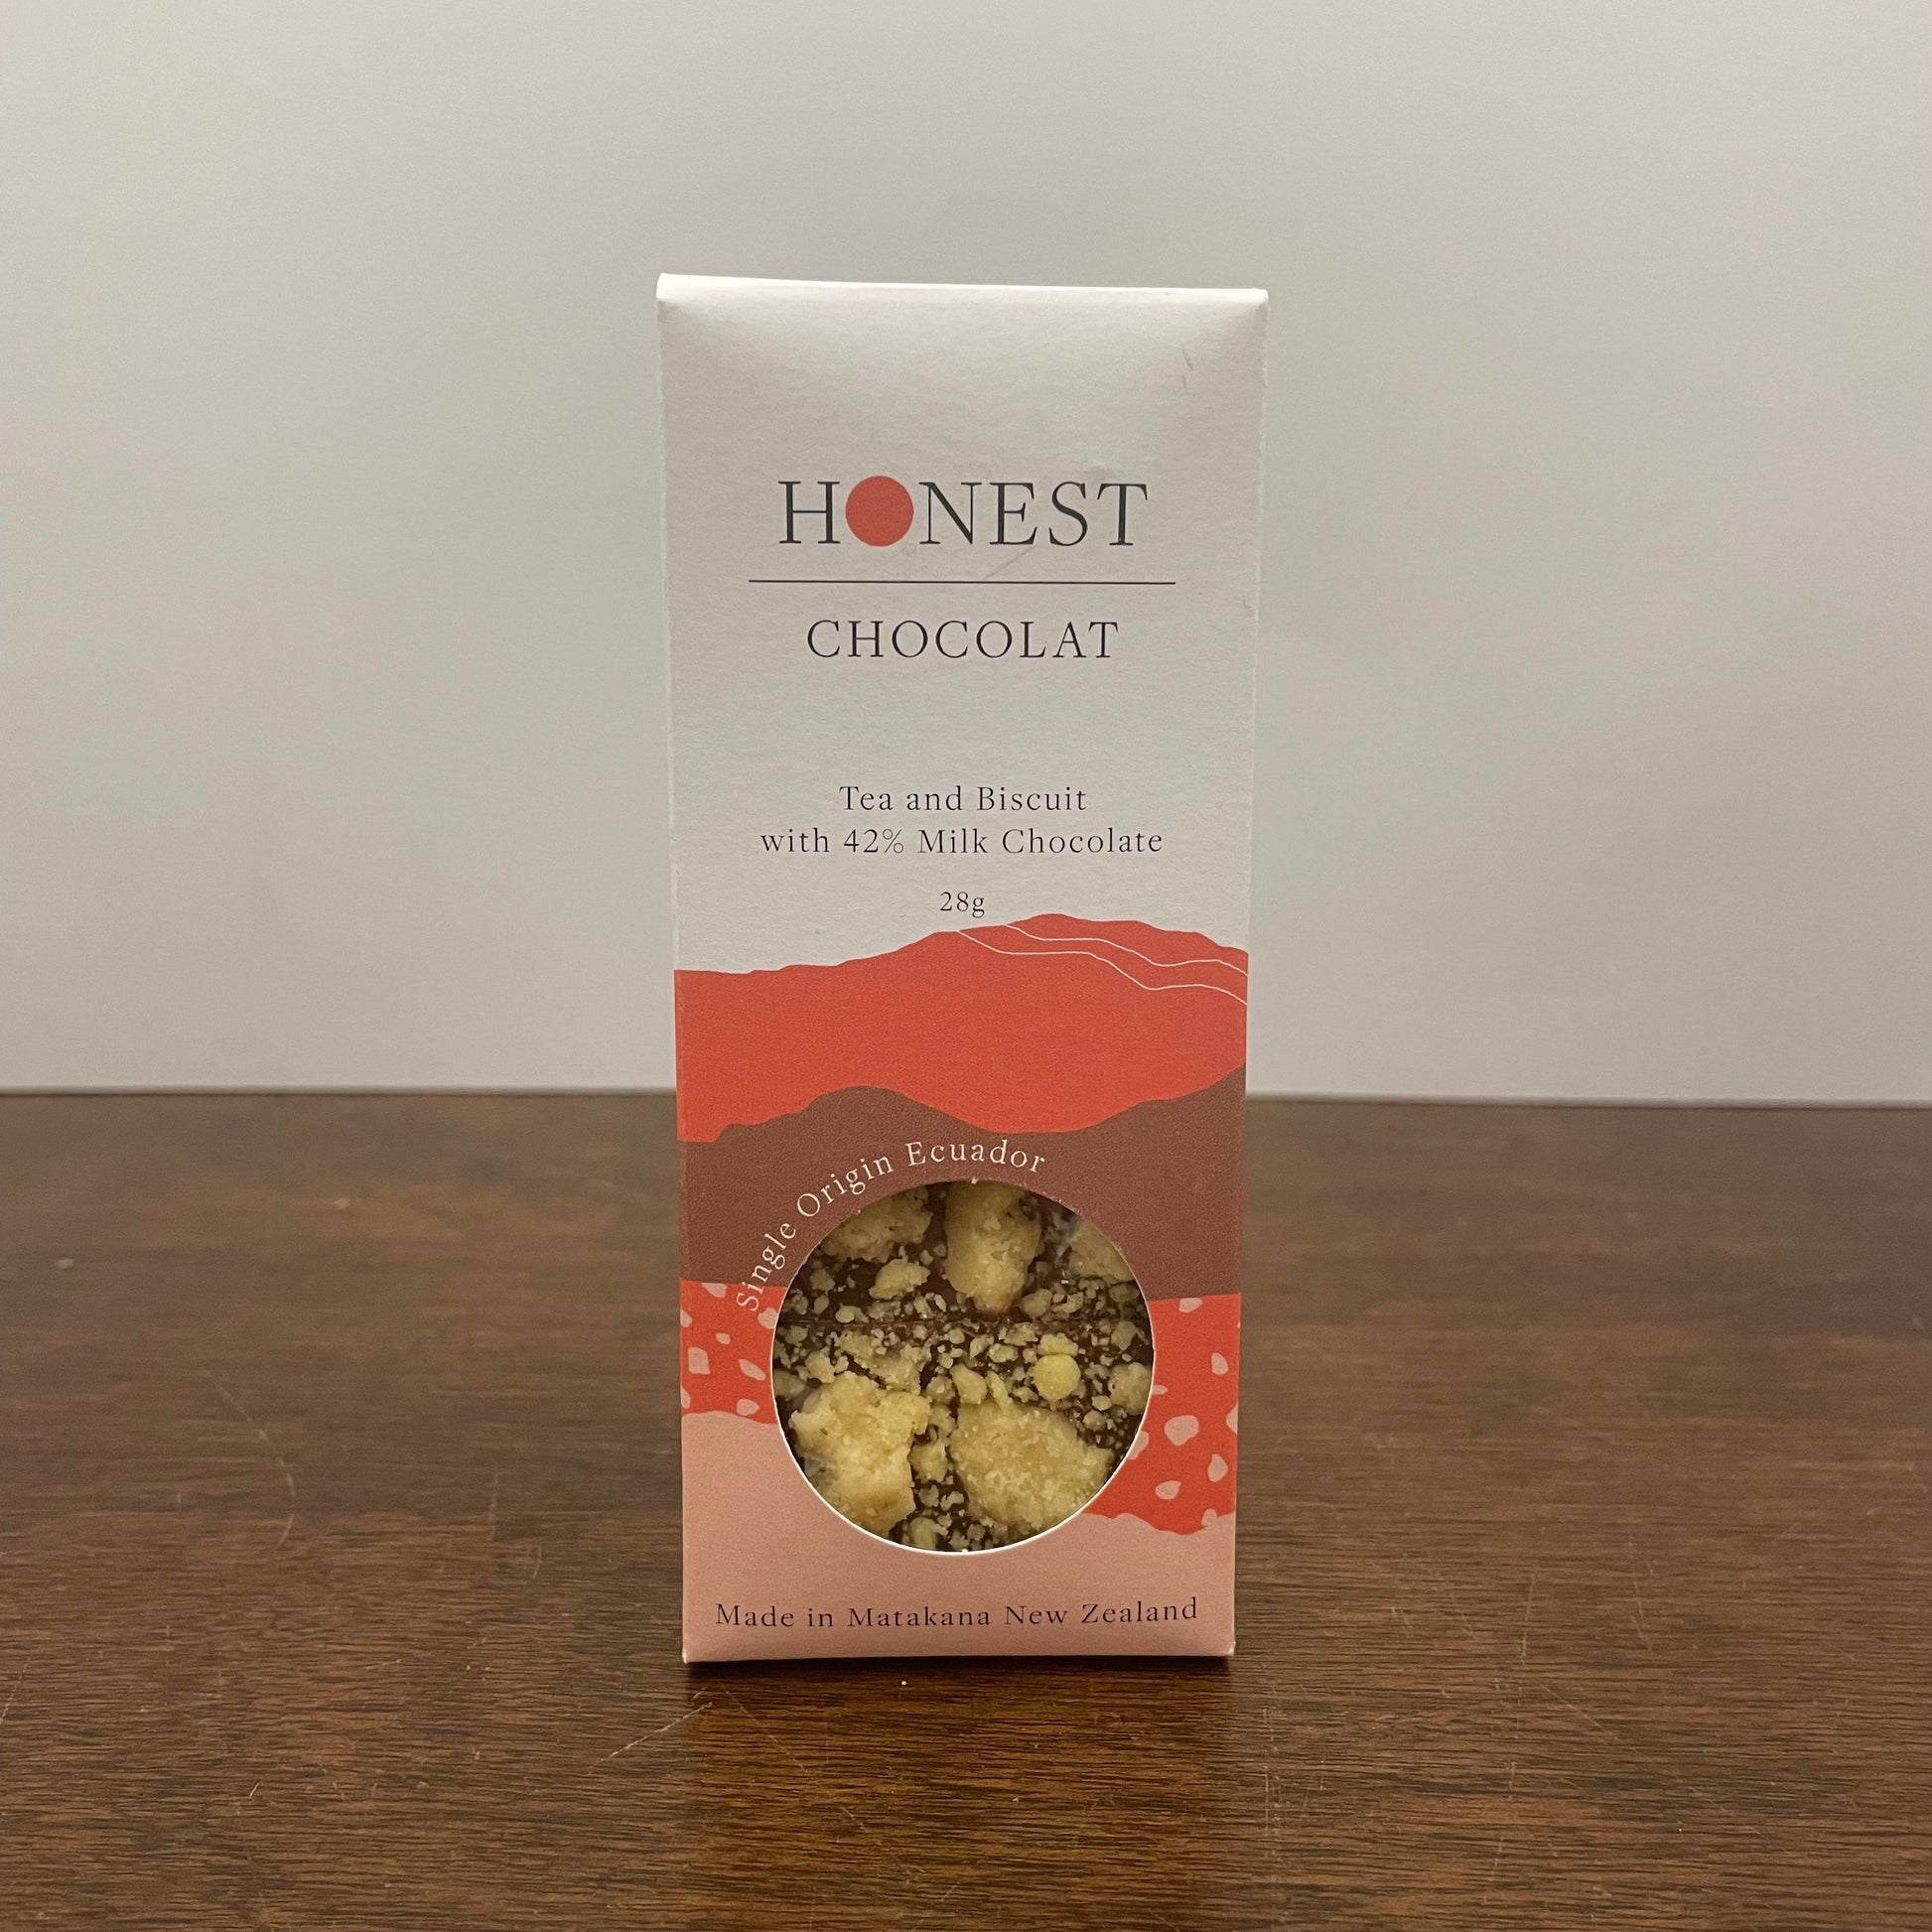 Tea and Biscuit mini chocolate made by Honest Choclat. 42% Milk Chocolate. 28g